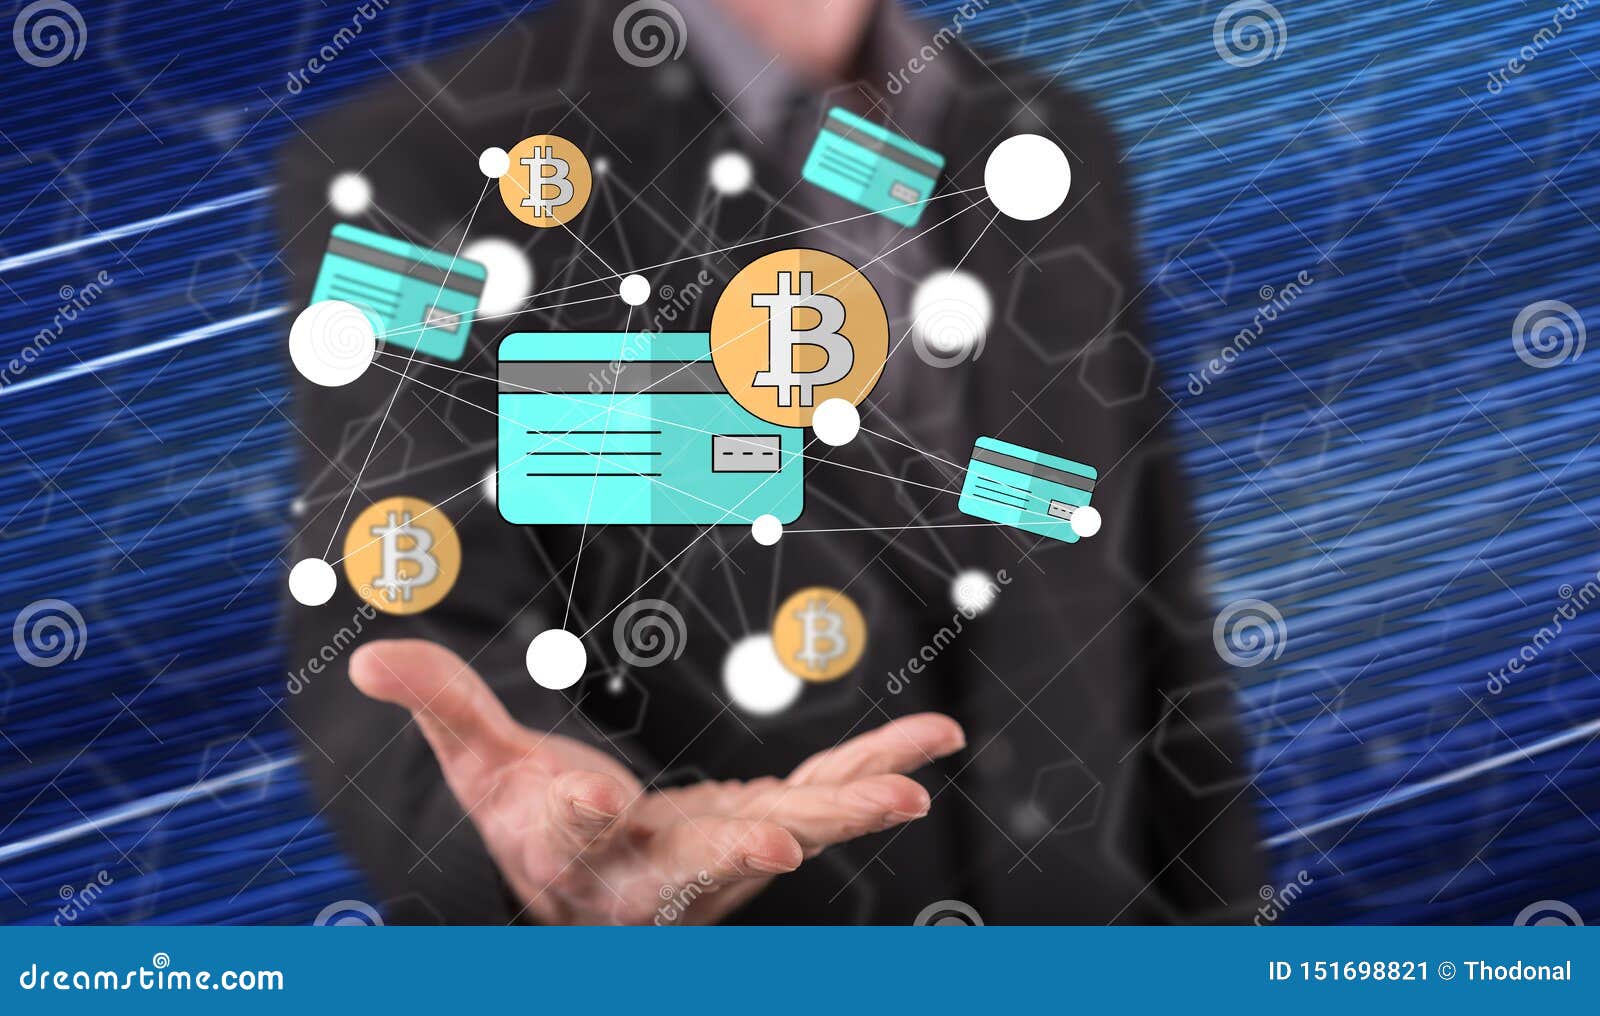 Concept Of Bitcoin Credit Card Stock Image - Image of cryptocurrency, financial: 151698821